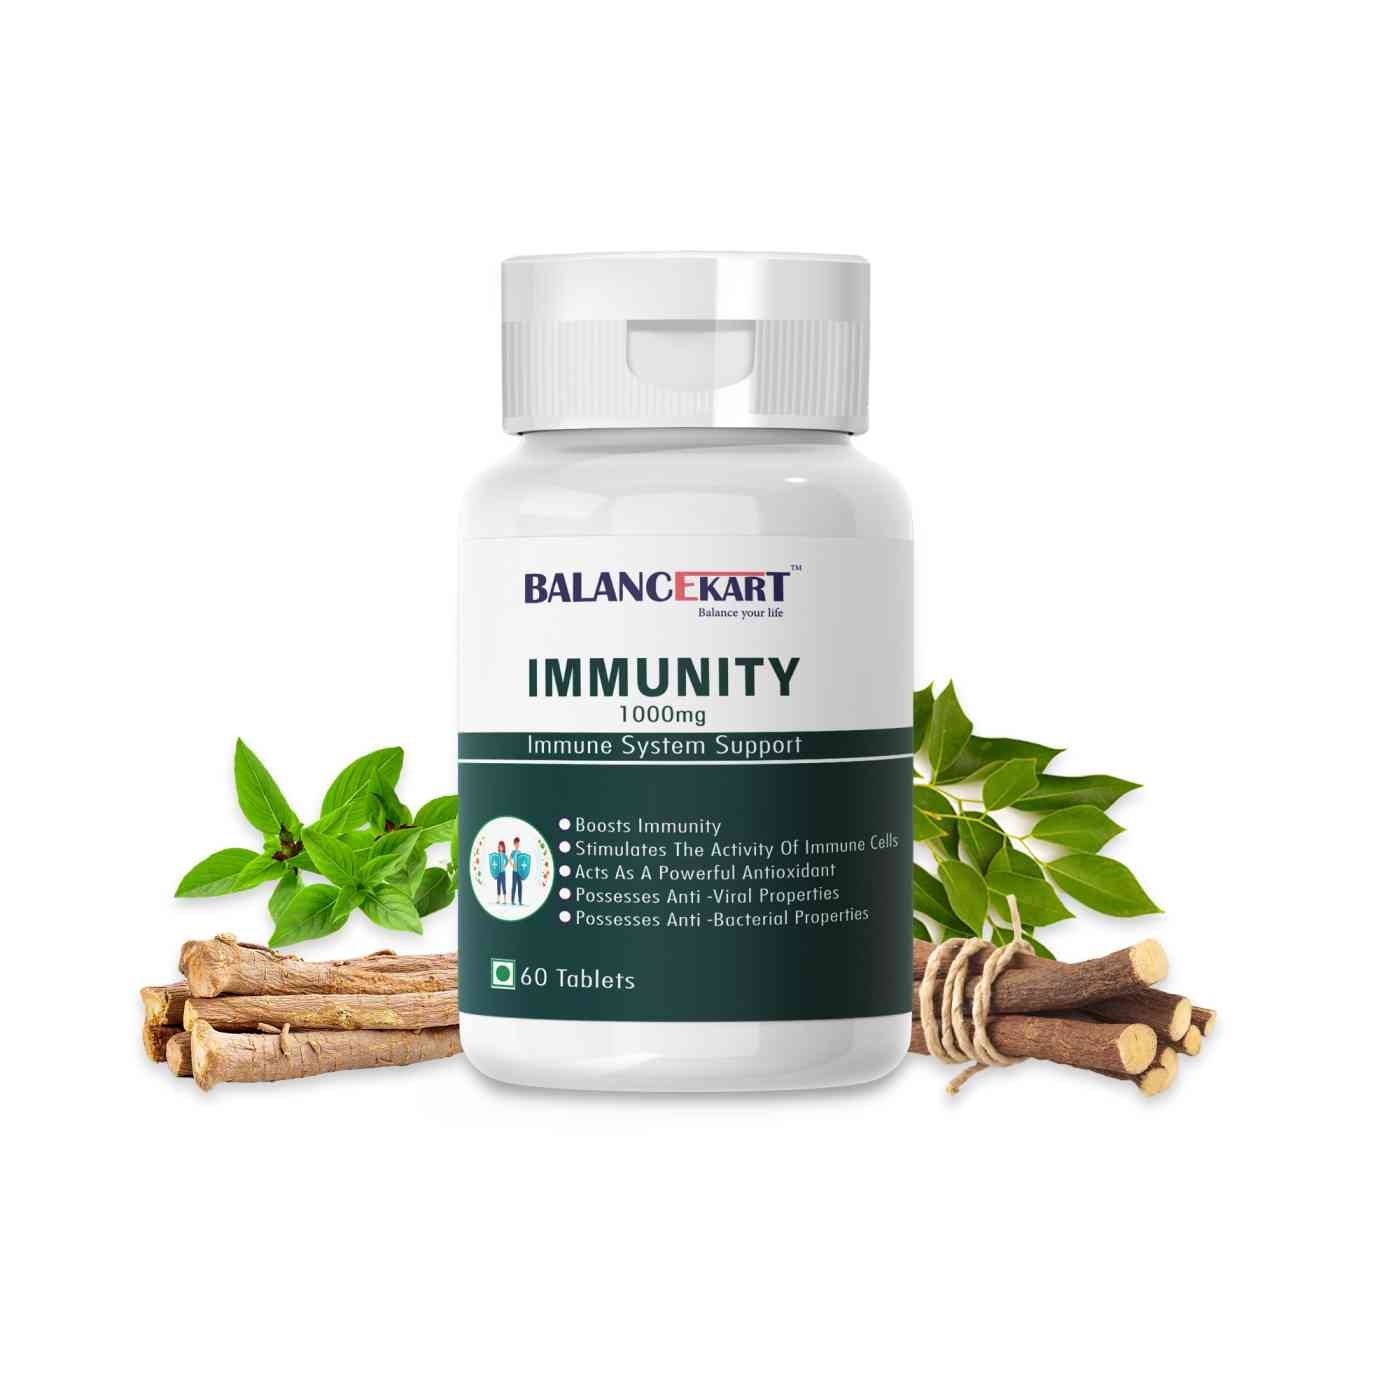 How To Boost the Immune System Quickly?